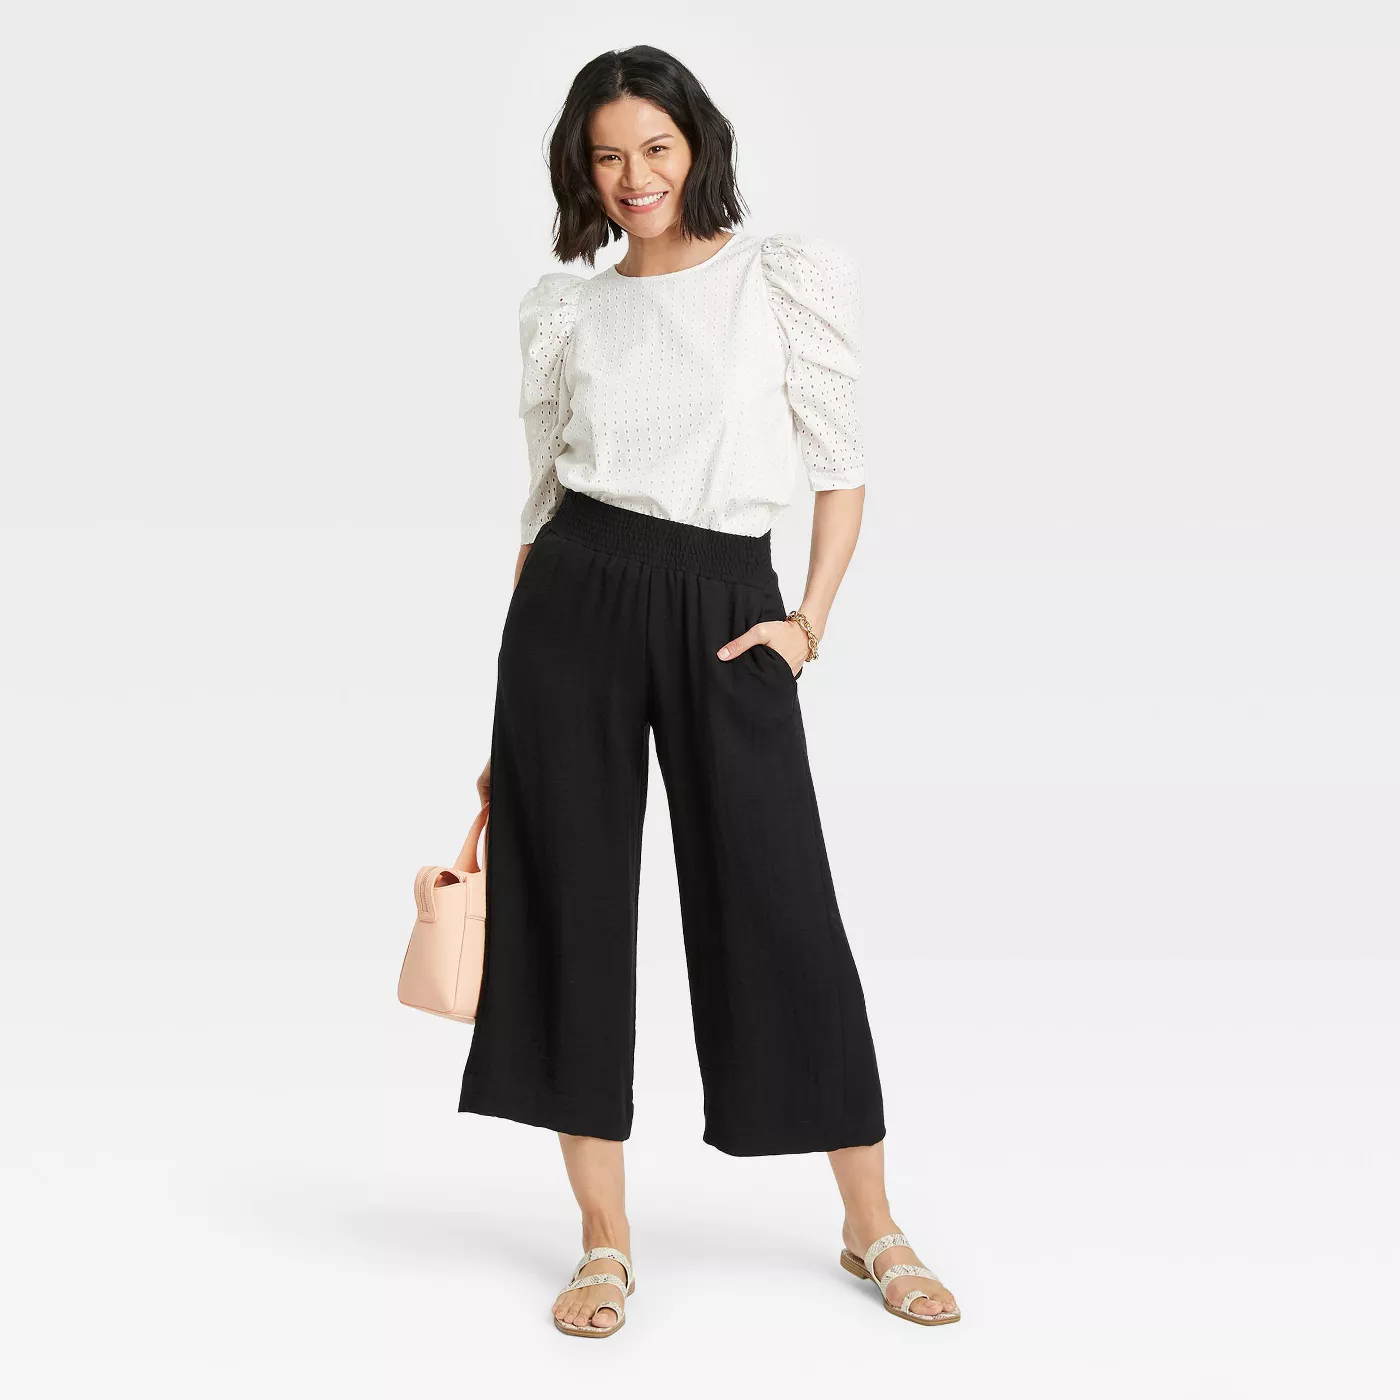 Women's High-Rise Cropped Wide Leg Pull-On Pants - A New Day™ - image 3 of 8